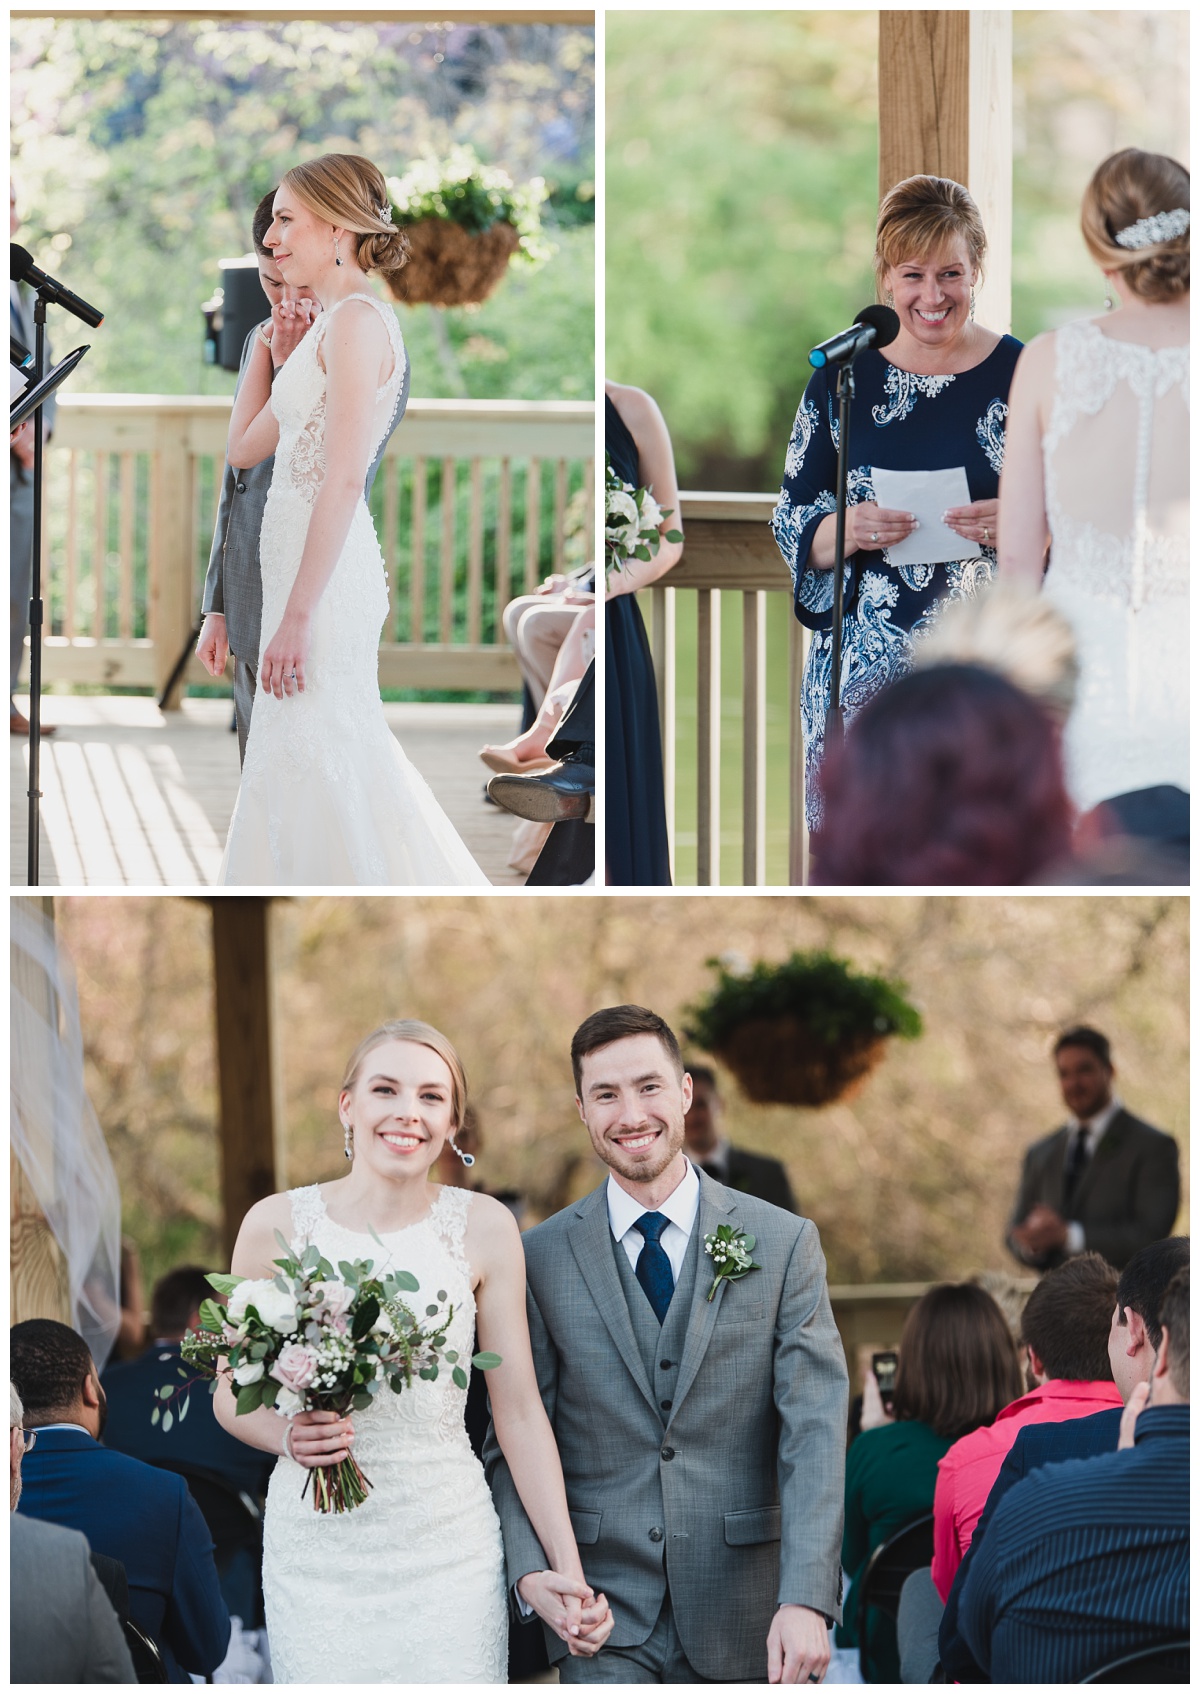 excerpts from wedding ceremony at St. Louis Zoo, wedding photography by Sandra Grunzinger Photography